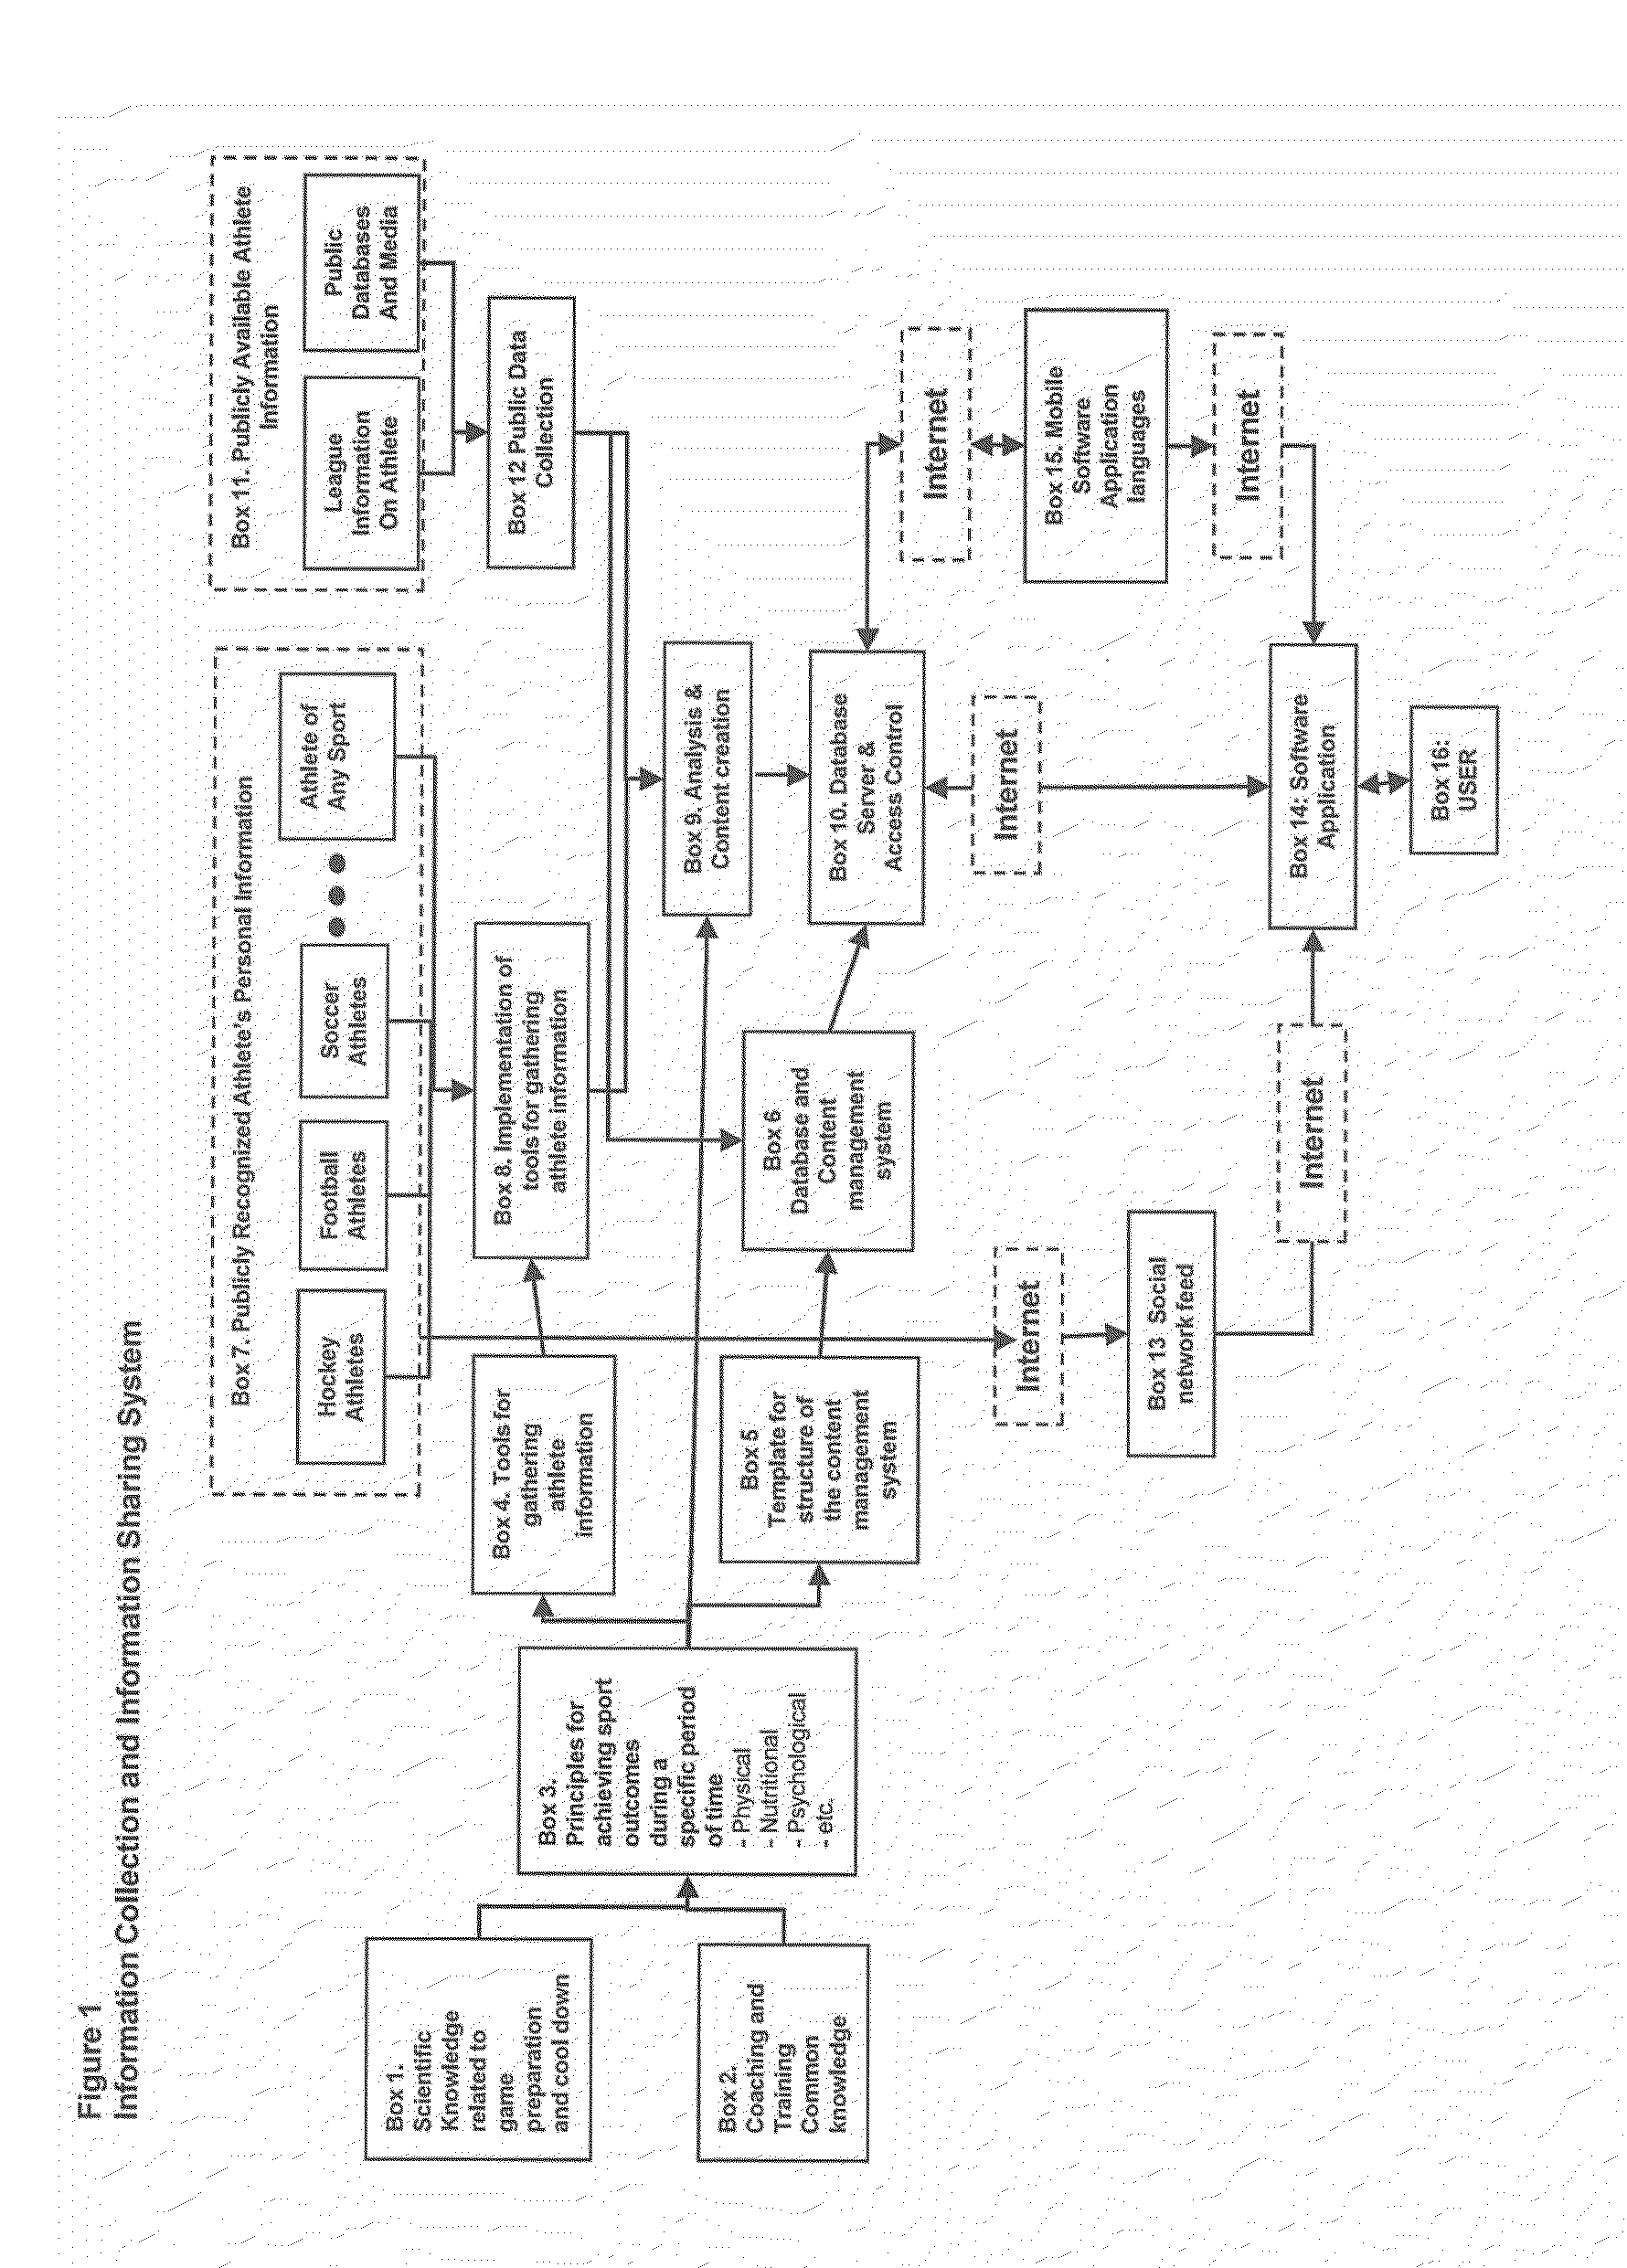 System for providing access over a network to users of training preferences of selected individuals